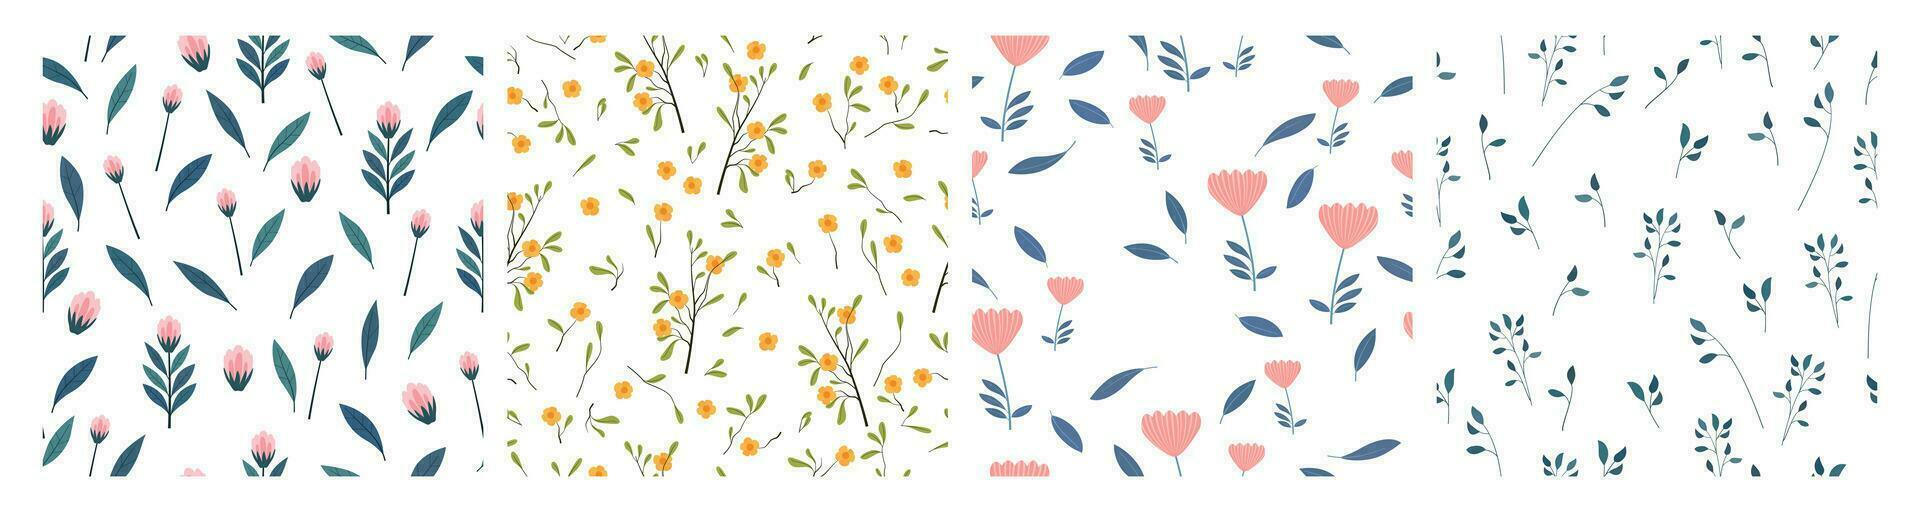 set of floral seamless patterns. hand drawn flowers, leaves and branches vector